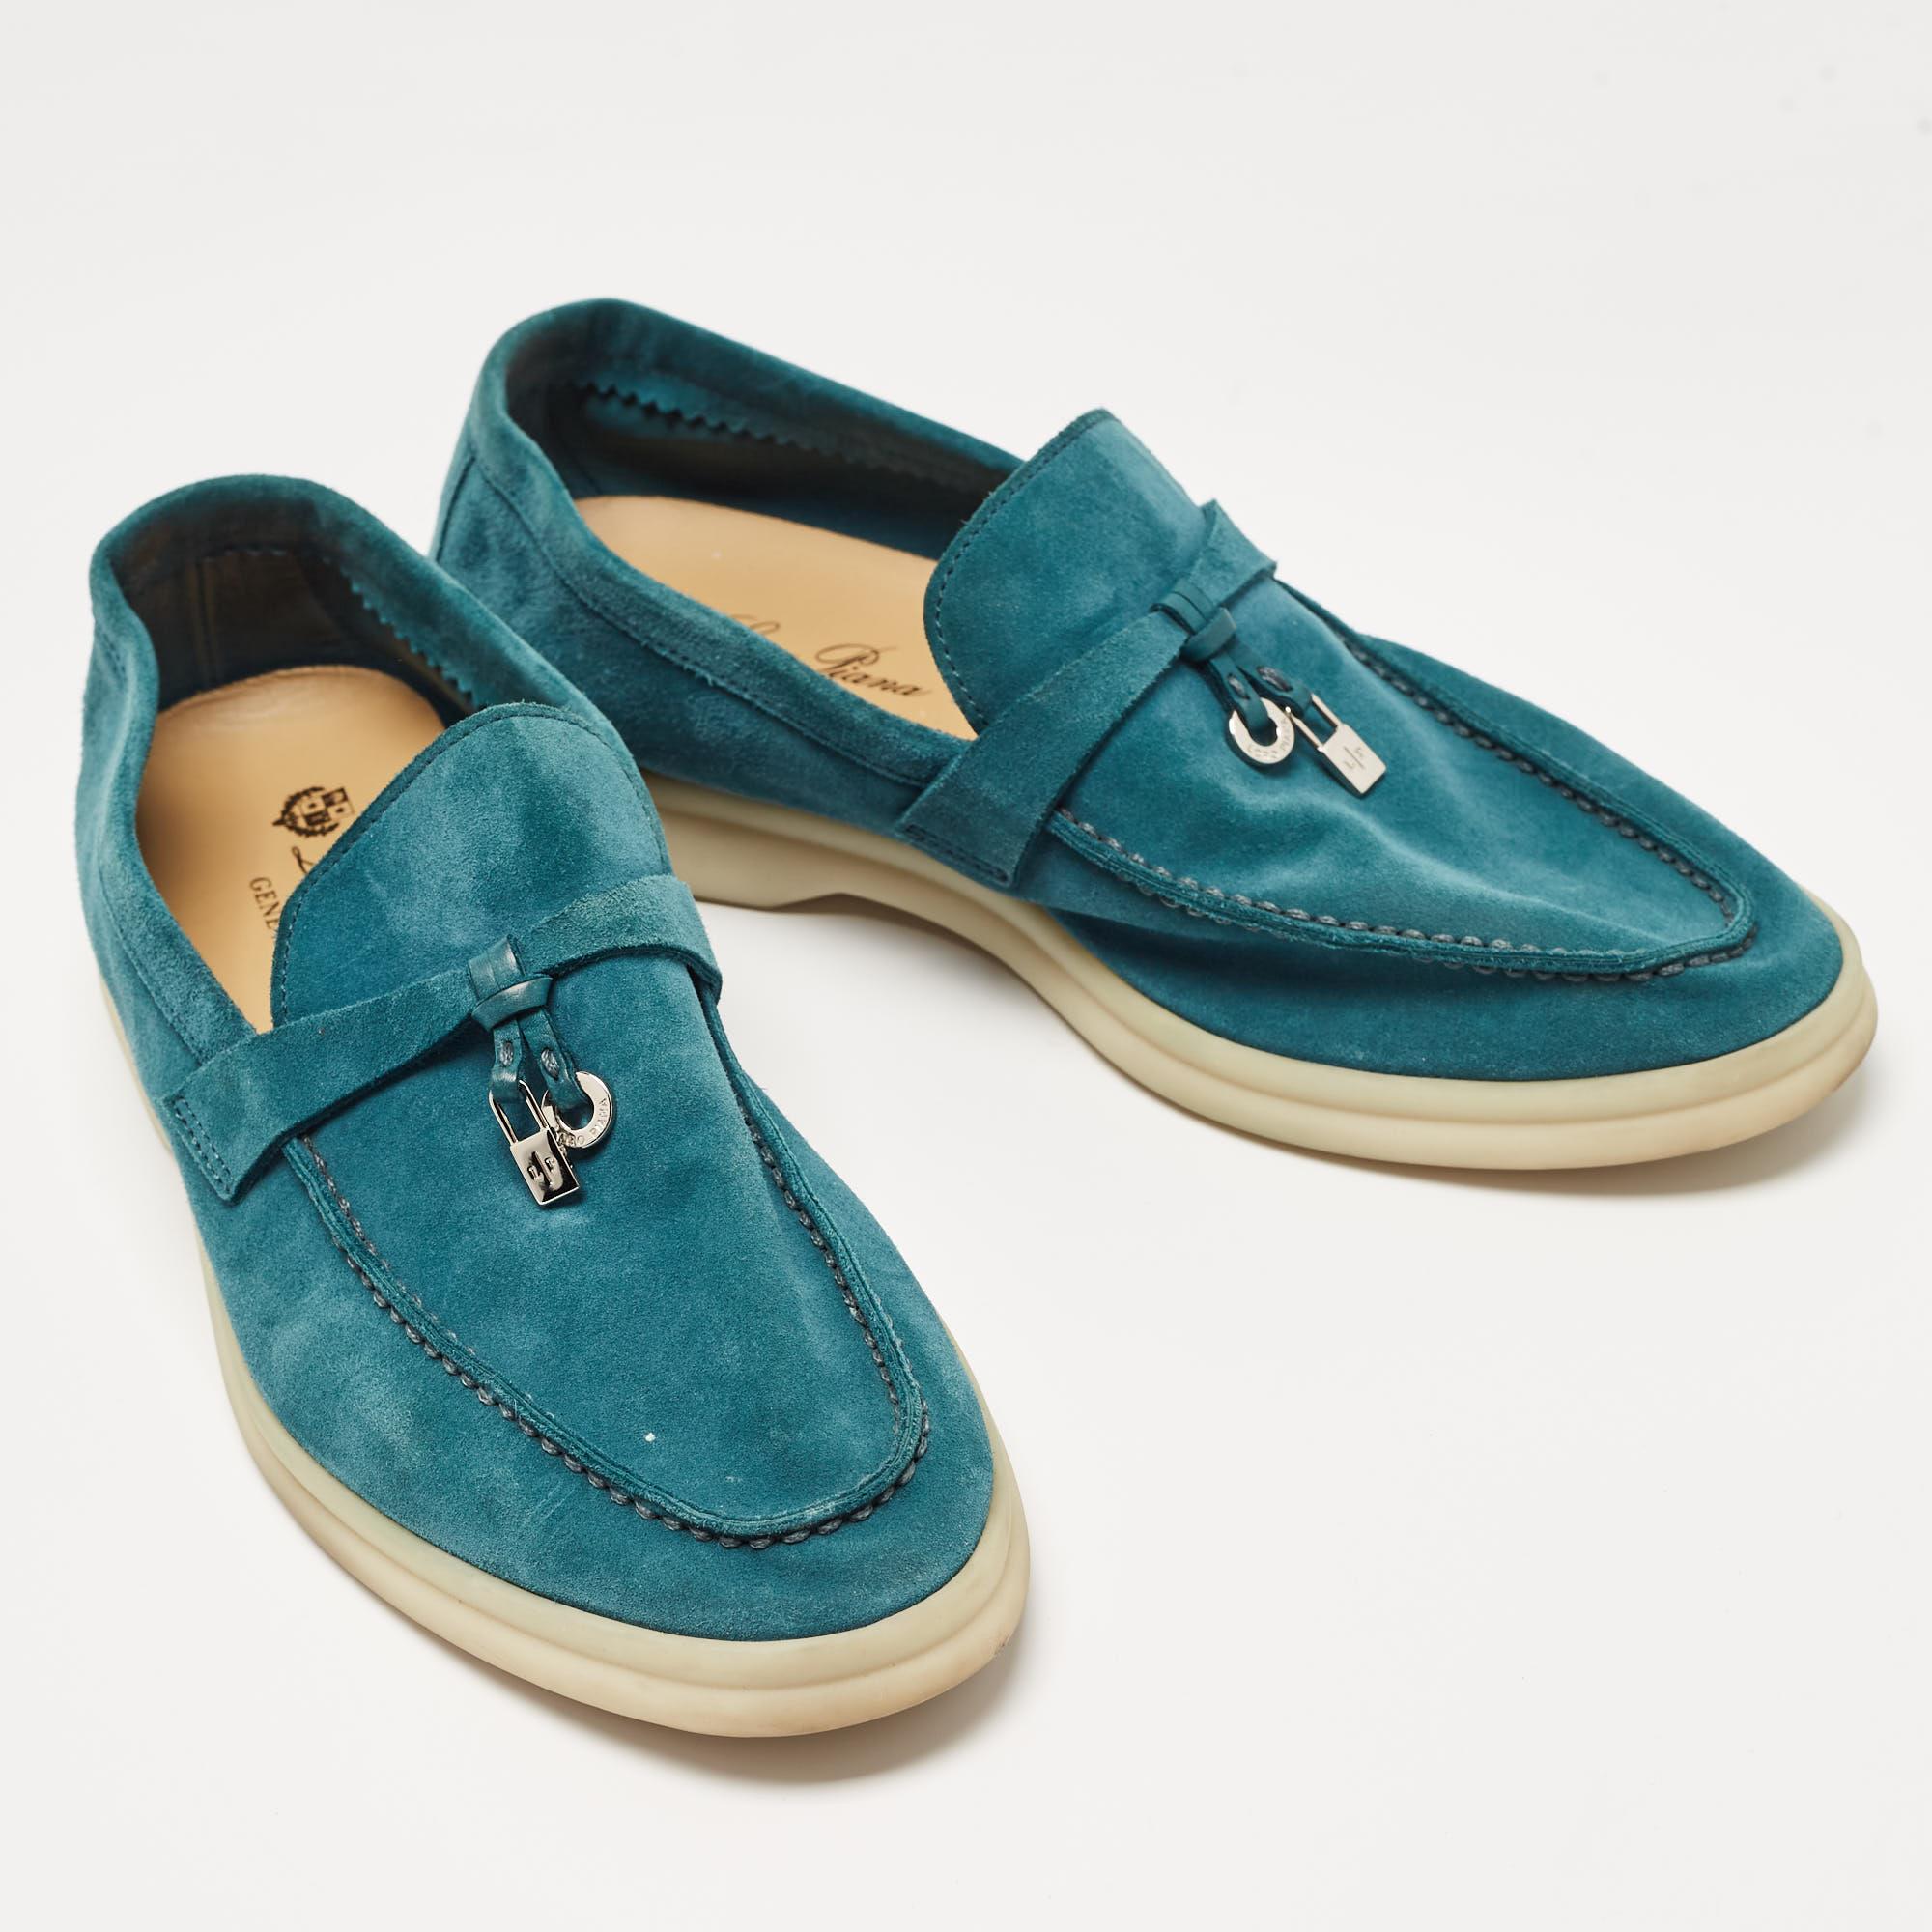 Loro Piana Teal Suede Summer Charms Walk Loafers Size 38 2